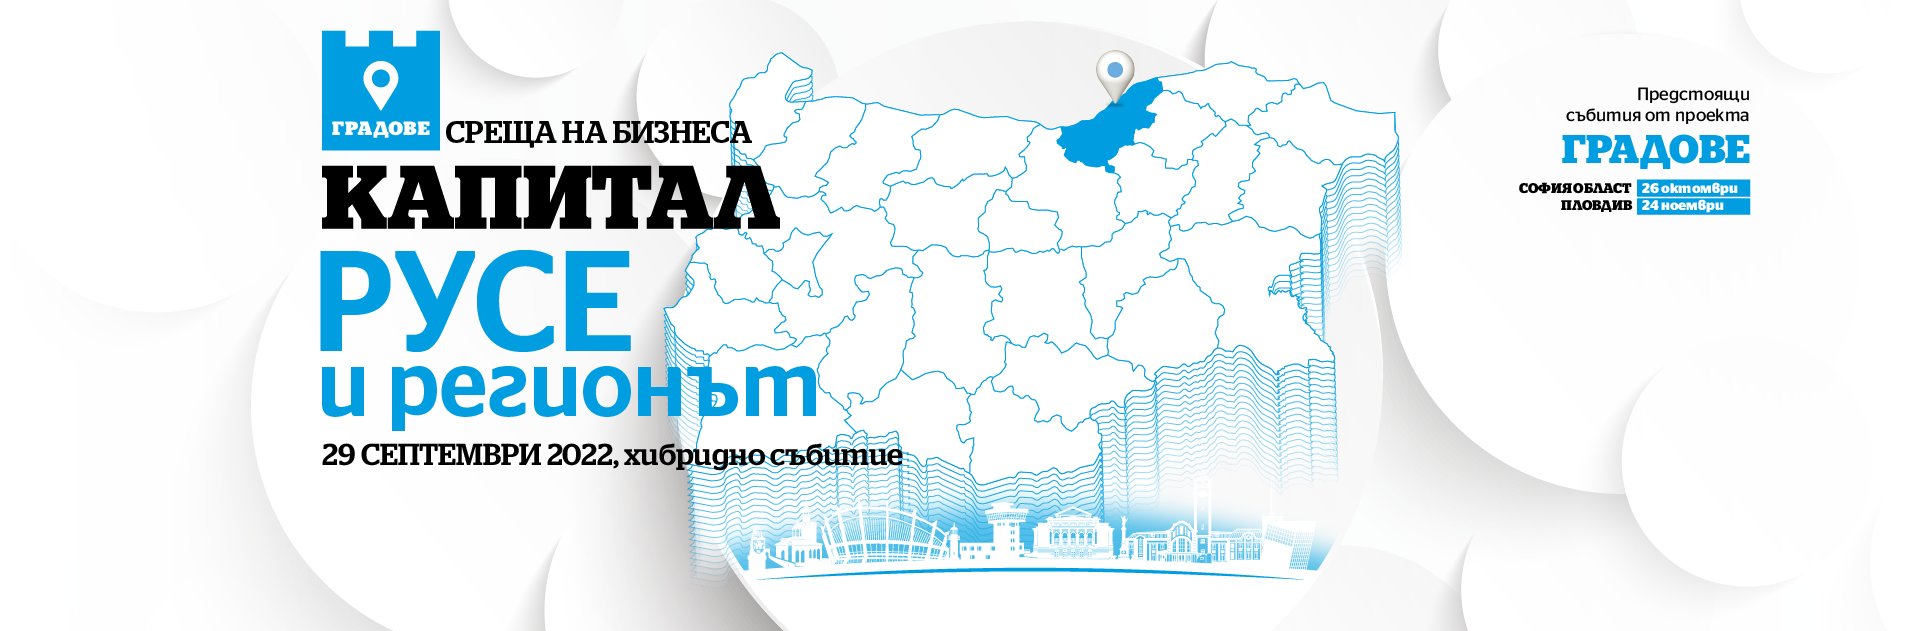 Meeting of businesses in Ruse and the region